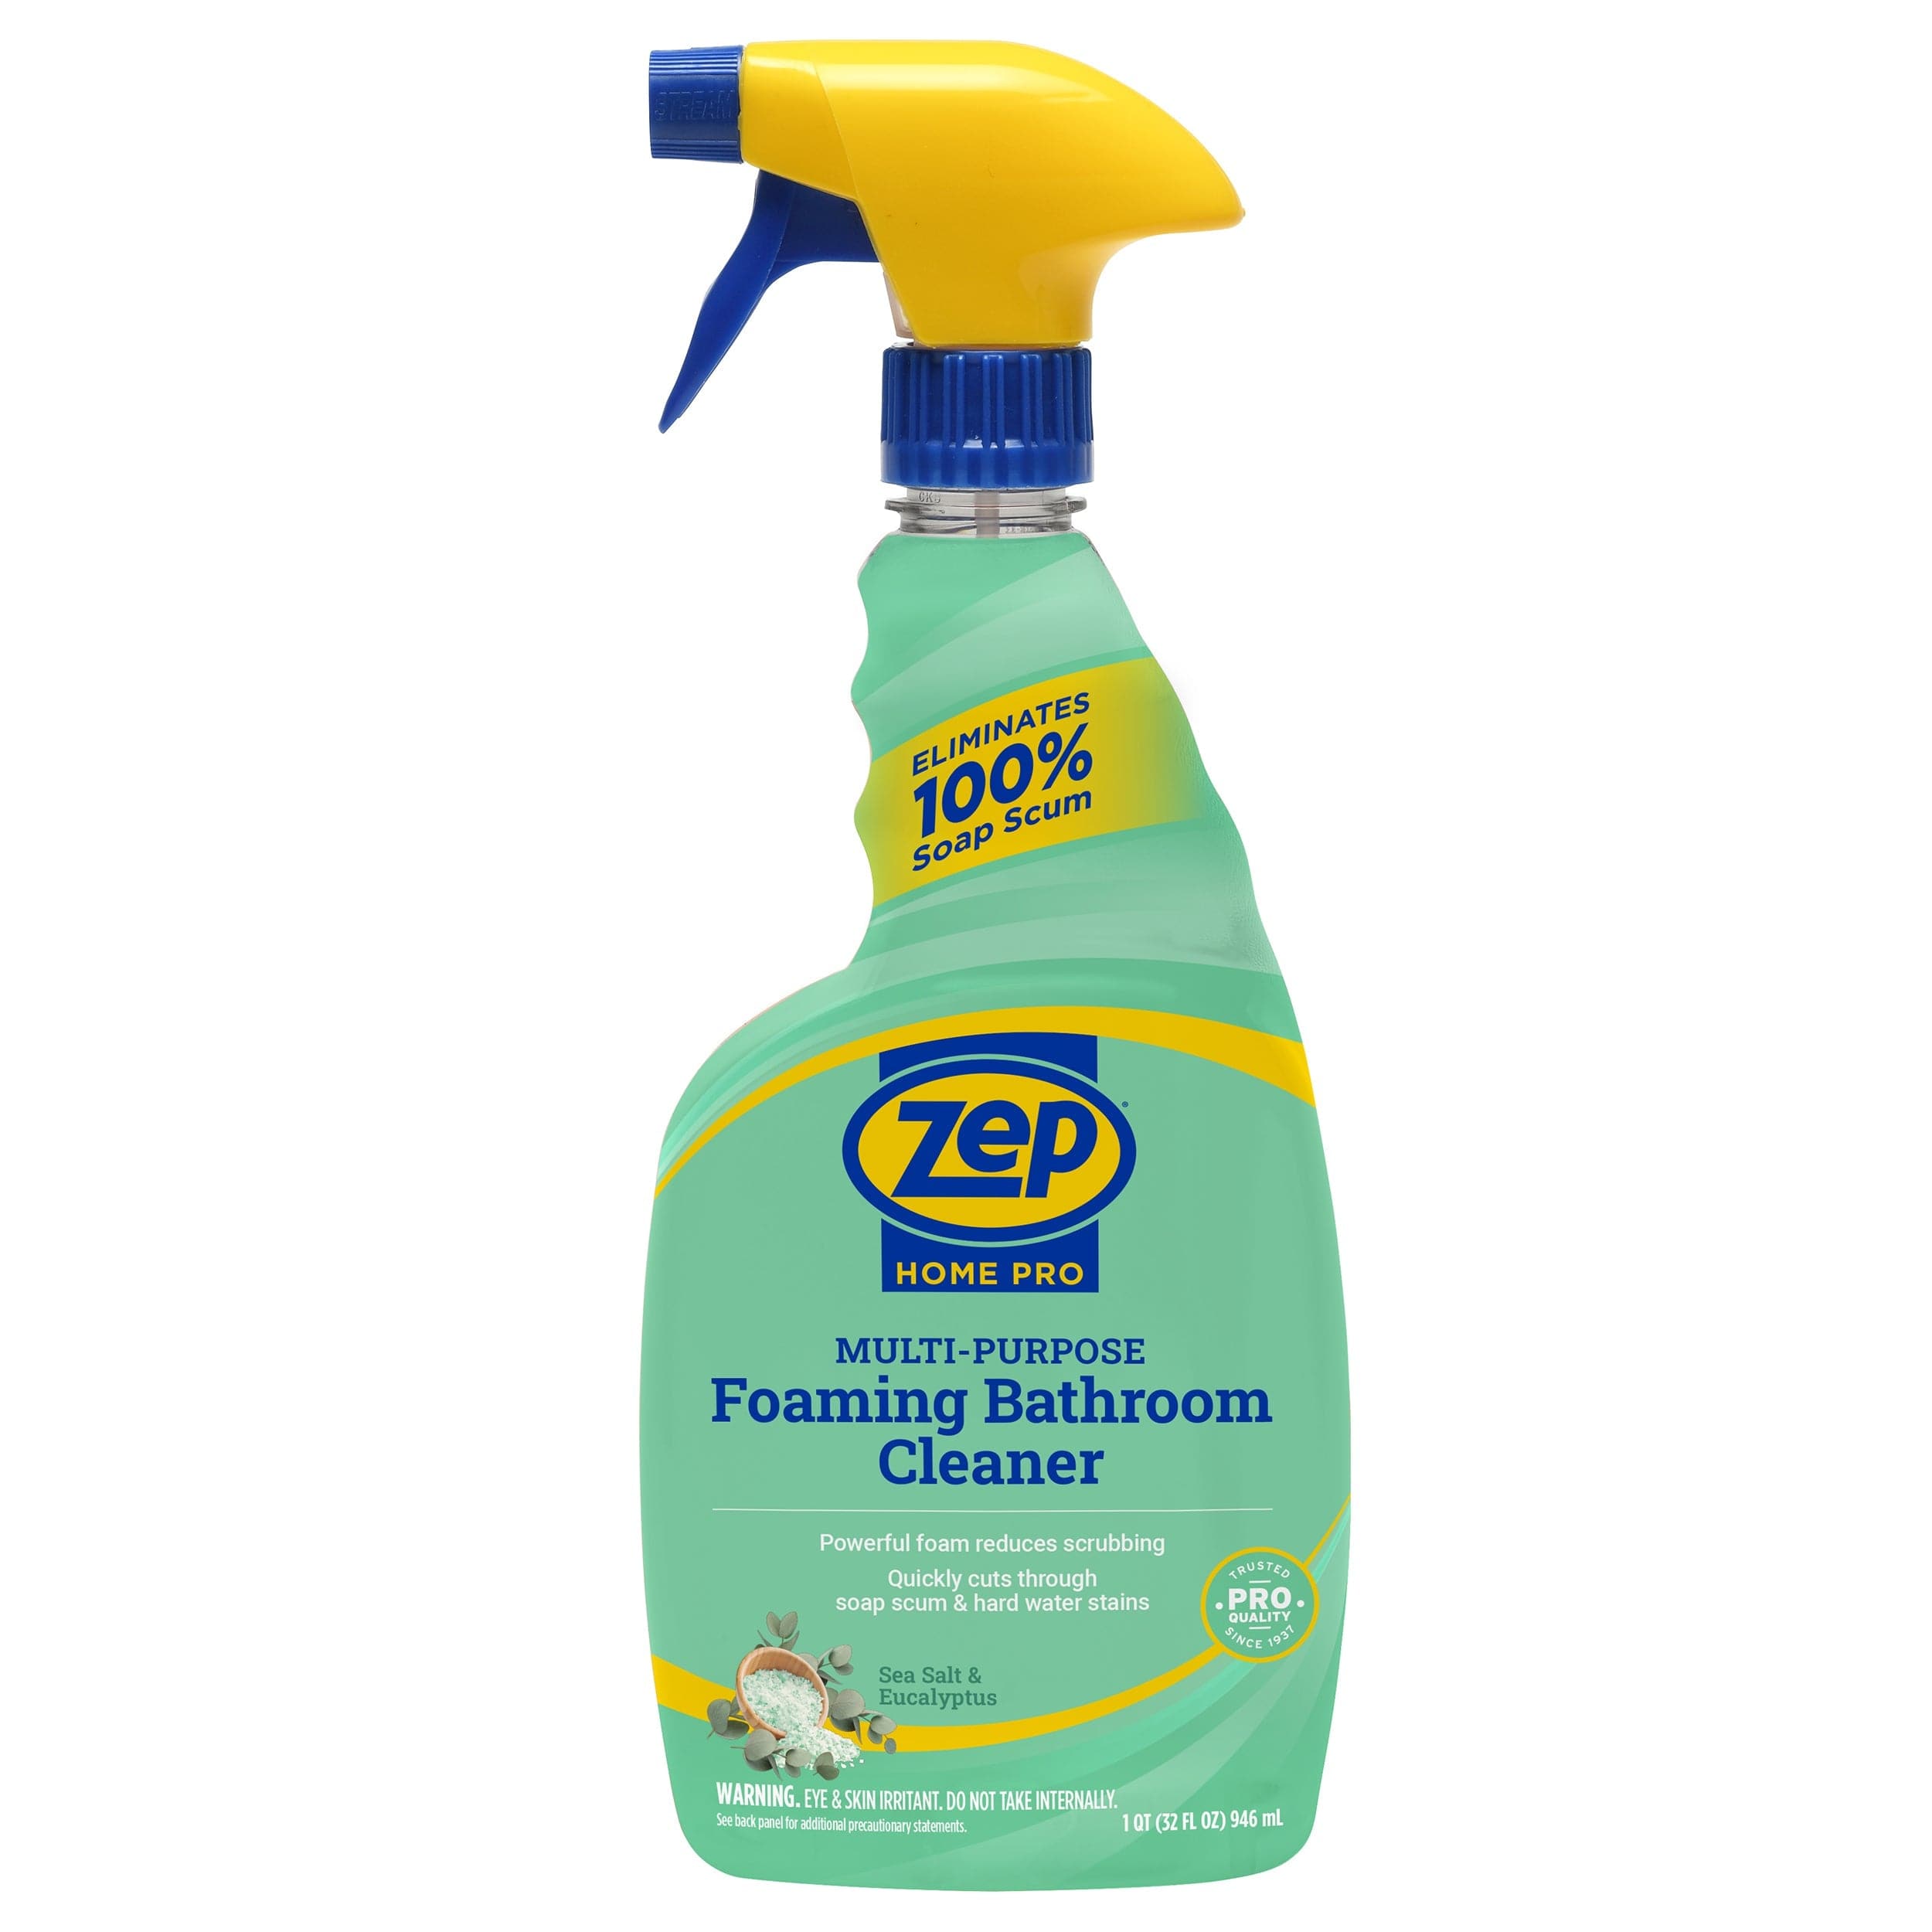 Foaming Bathroom Cleaner with Bleach Product Page